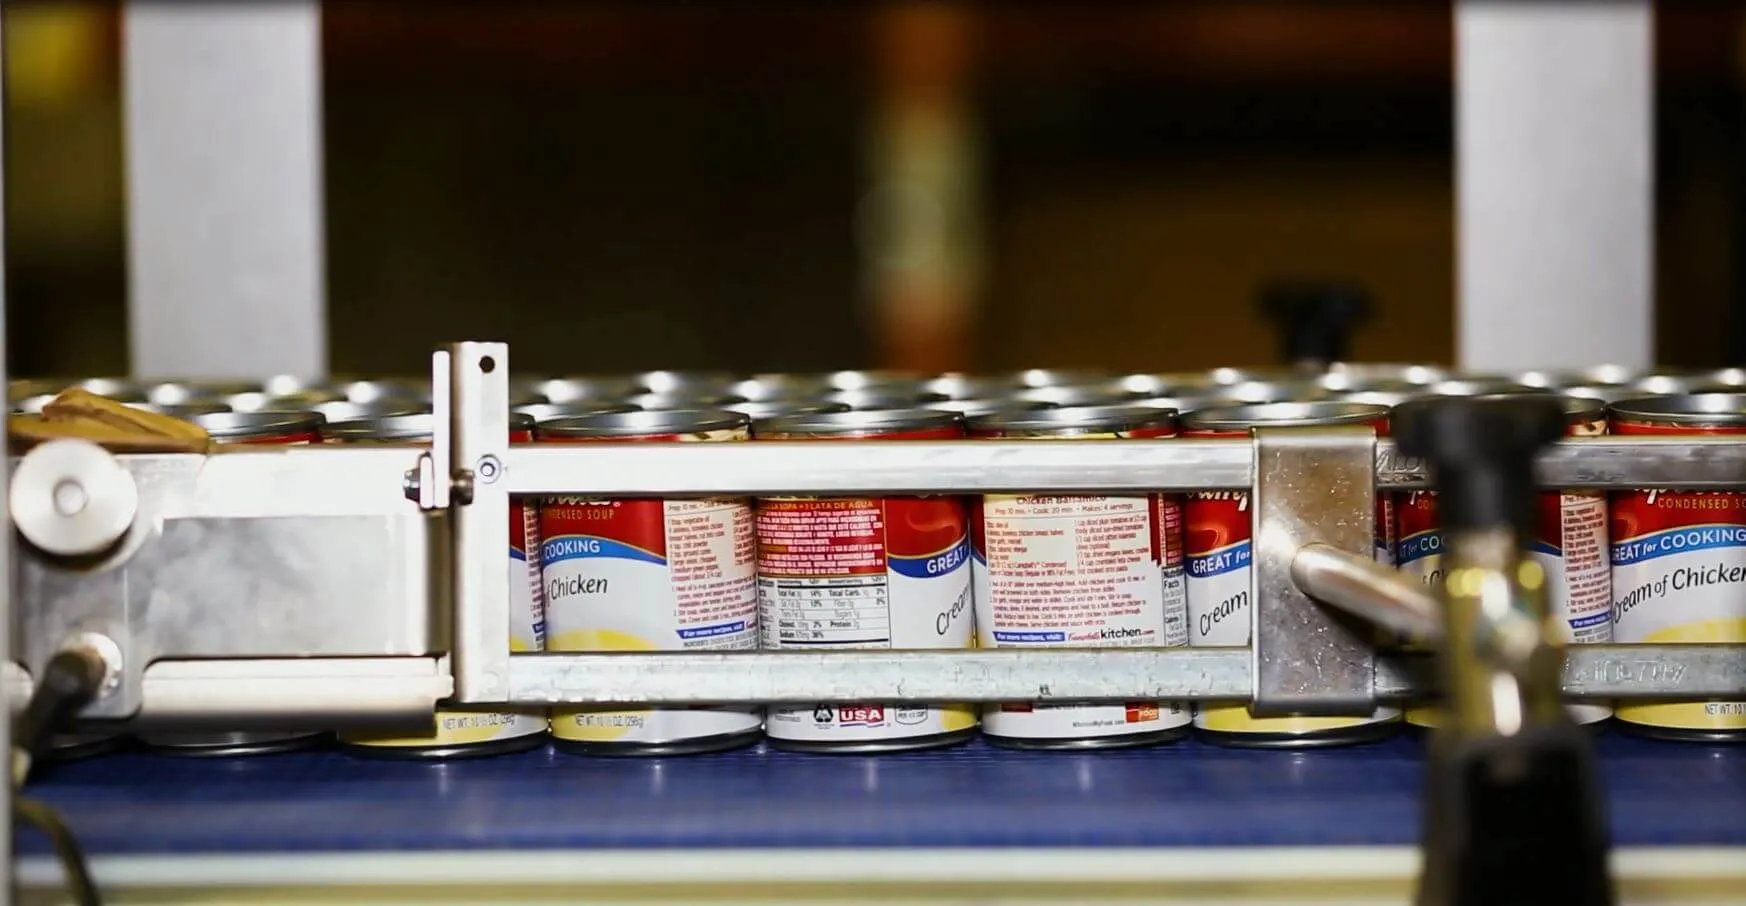 Campbell's Cream of Chicken Soup cans being sorted by Keller Logistics